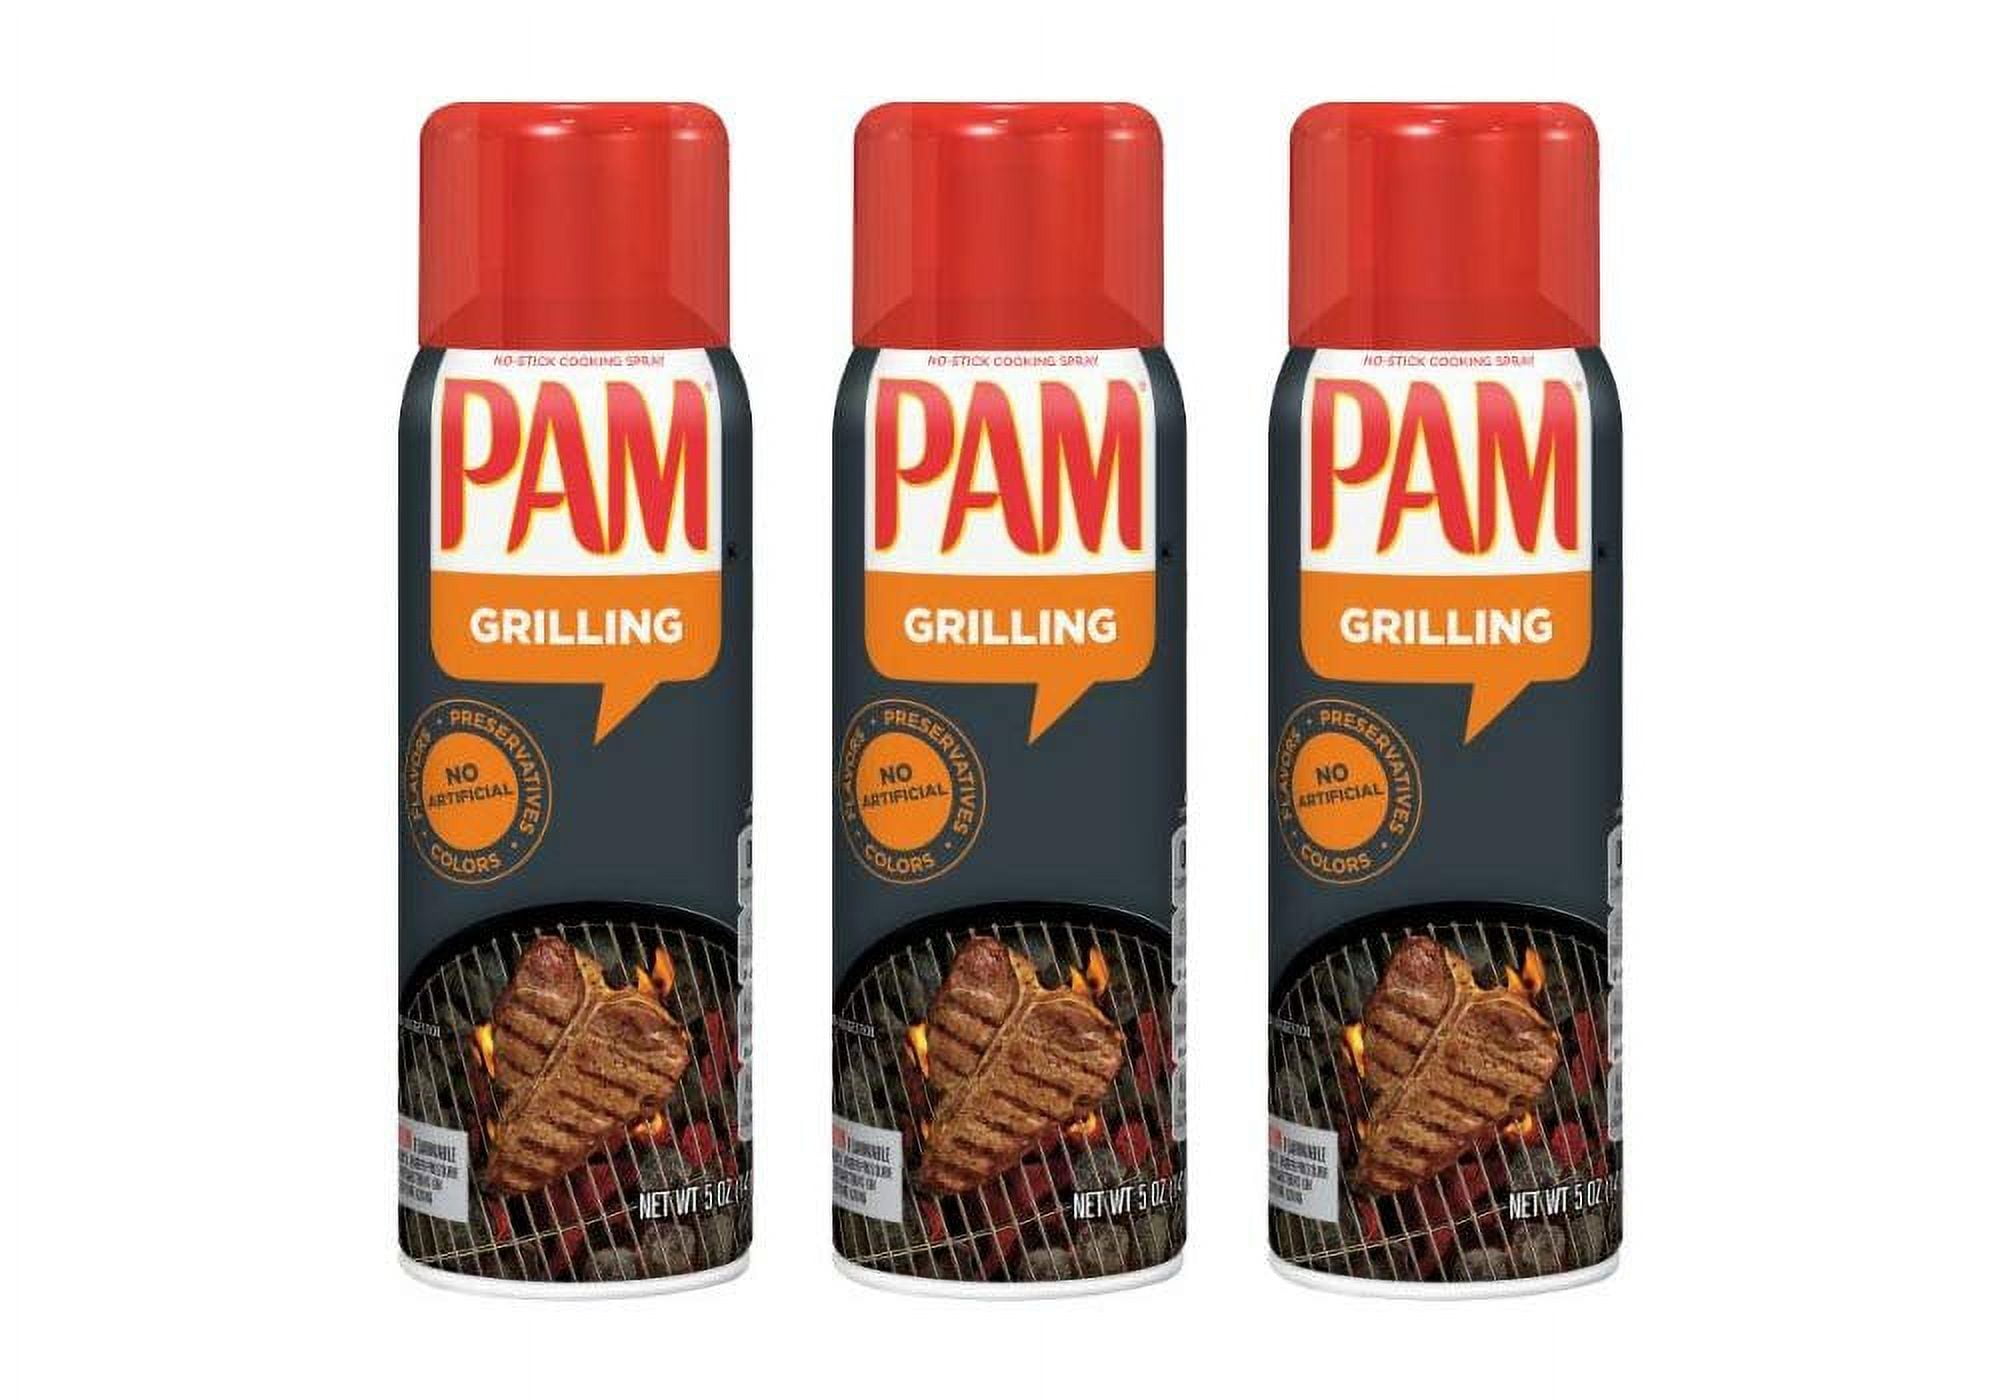 PAM – Saute & Grill Cooking Spray – 17 oz Can - Kerala, South Indian  Groceries, Fresh Vegetables, Indian Fish and Halal Meat